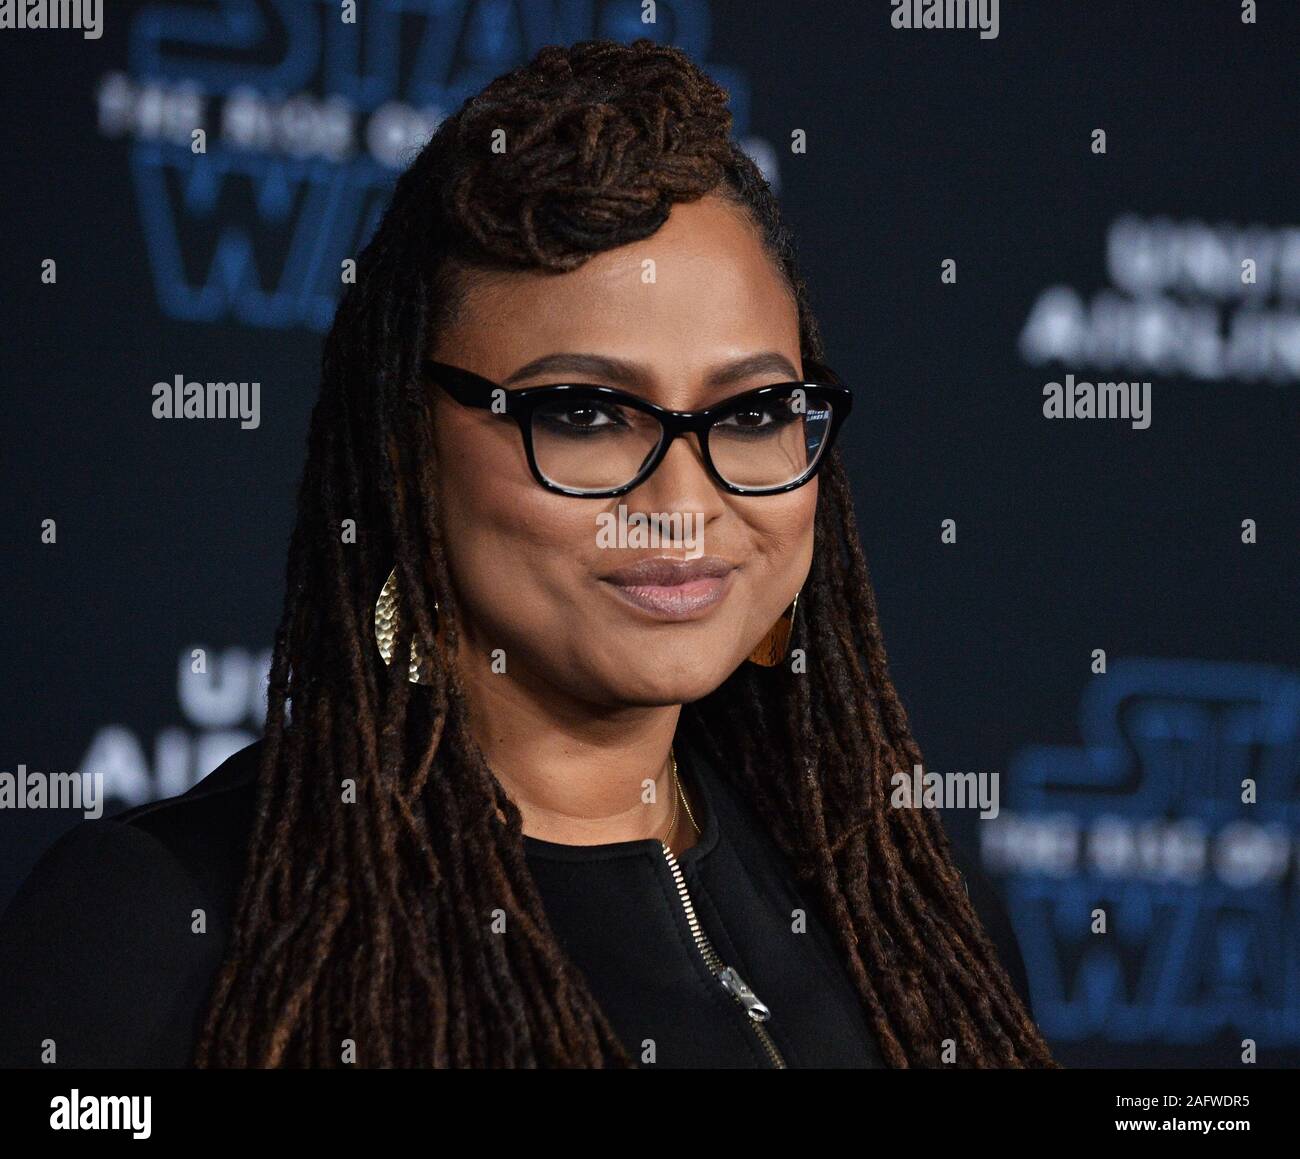 Los Angeles, United States. 17th Dec, 2019. Director Ava DuVernay attends the premiere the motion picture sci-fi fantasy 'Star Wars: The Rise of Skywalker' at the TCL Chinese Theatre in the Hollywood section of Los Angeles on Monday, December 16, 2019. Storyline: The surviving Resistance faces the First Order once more in the final chapter of the Skywalker saga. Photo by Jim Ruymen/UPI Credit: UPI/Alamy Live News Stock Photo